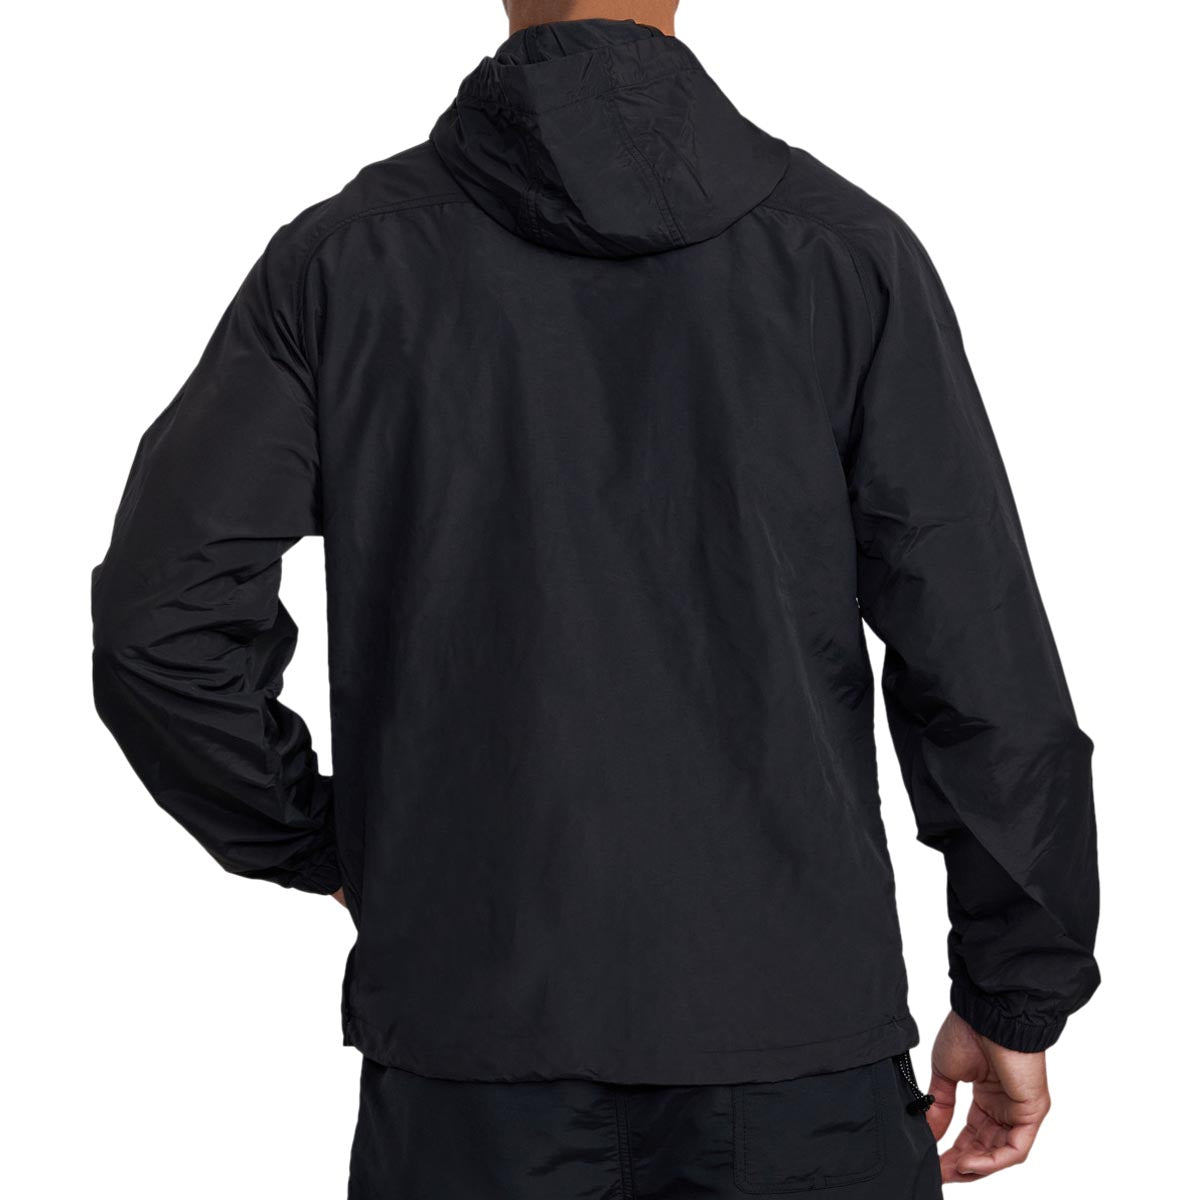 RVCA Outsider Packable Anorack Jacket - Black image 3